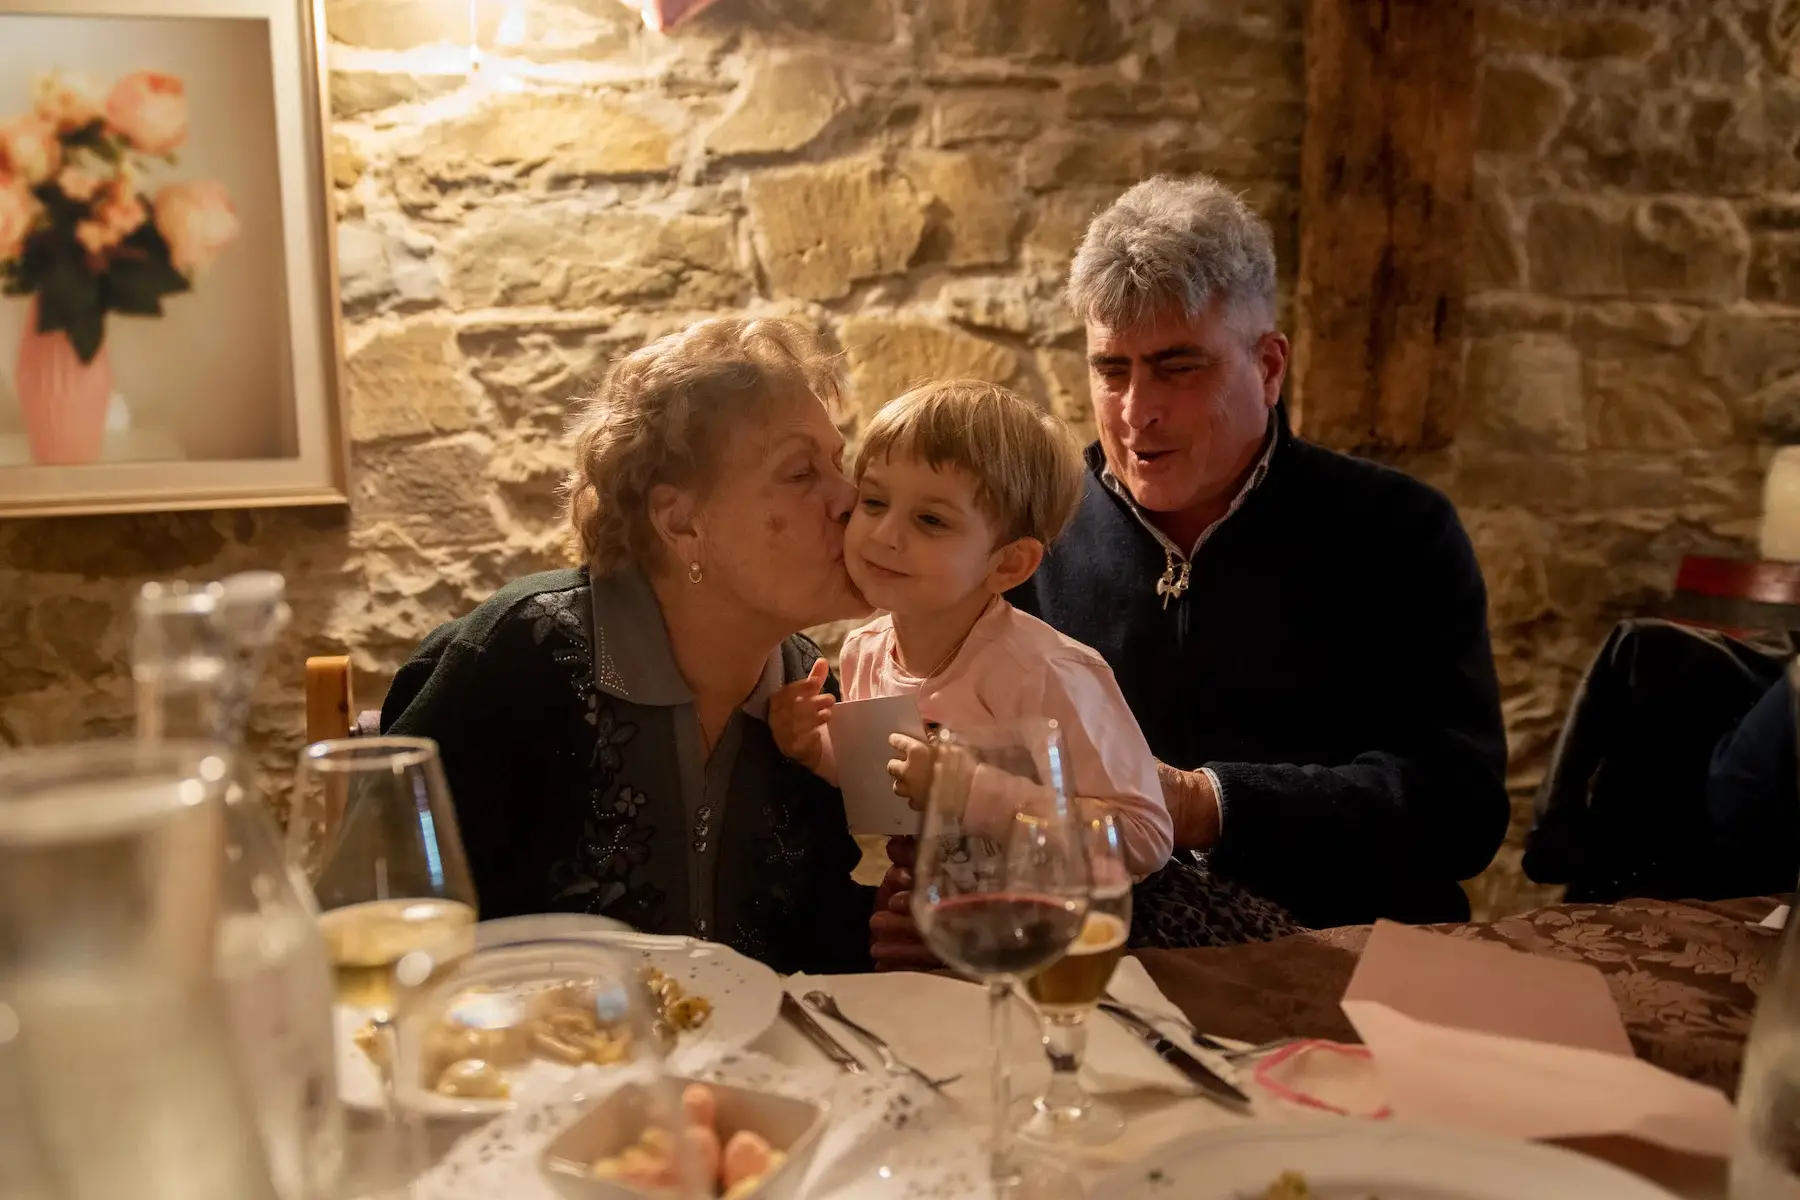 Grandparents hold their young grandchild while dining at a restaurant